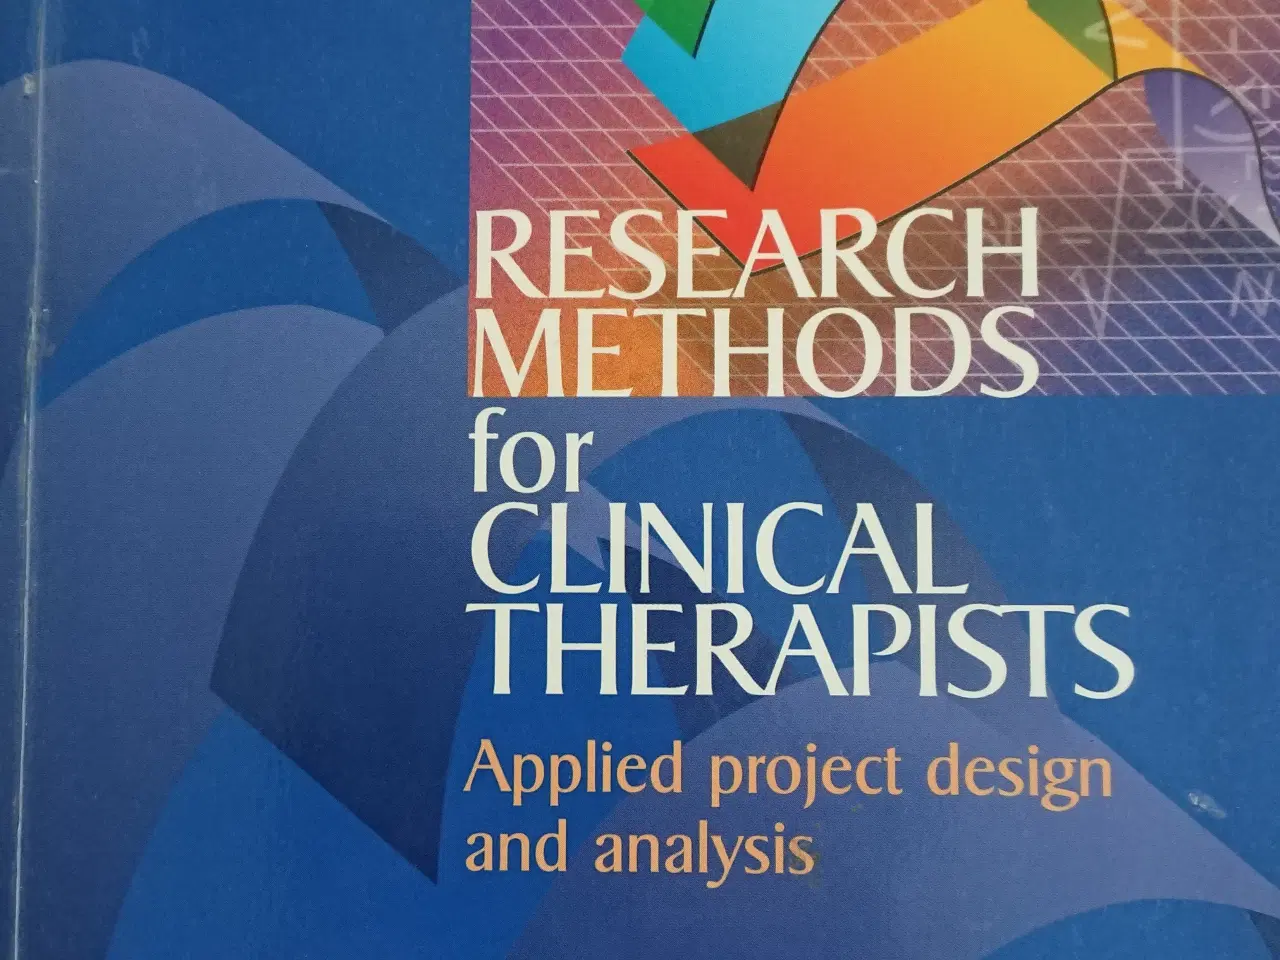 Billede 1 - Research methods for clinical therapists